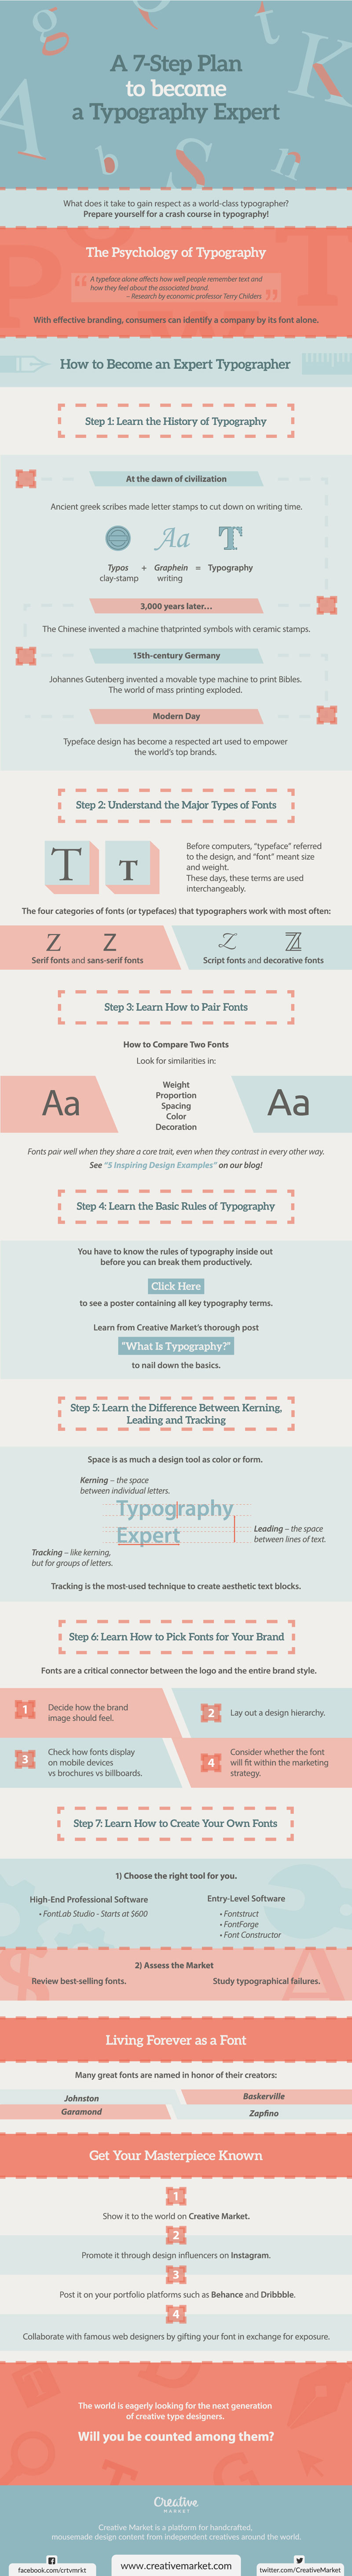 a-7-step-plan-to-become-a-typography-expert-infographic-1-01